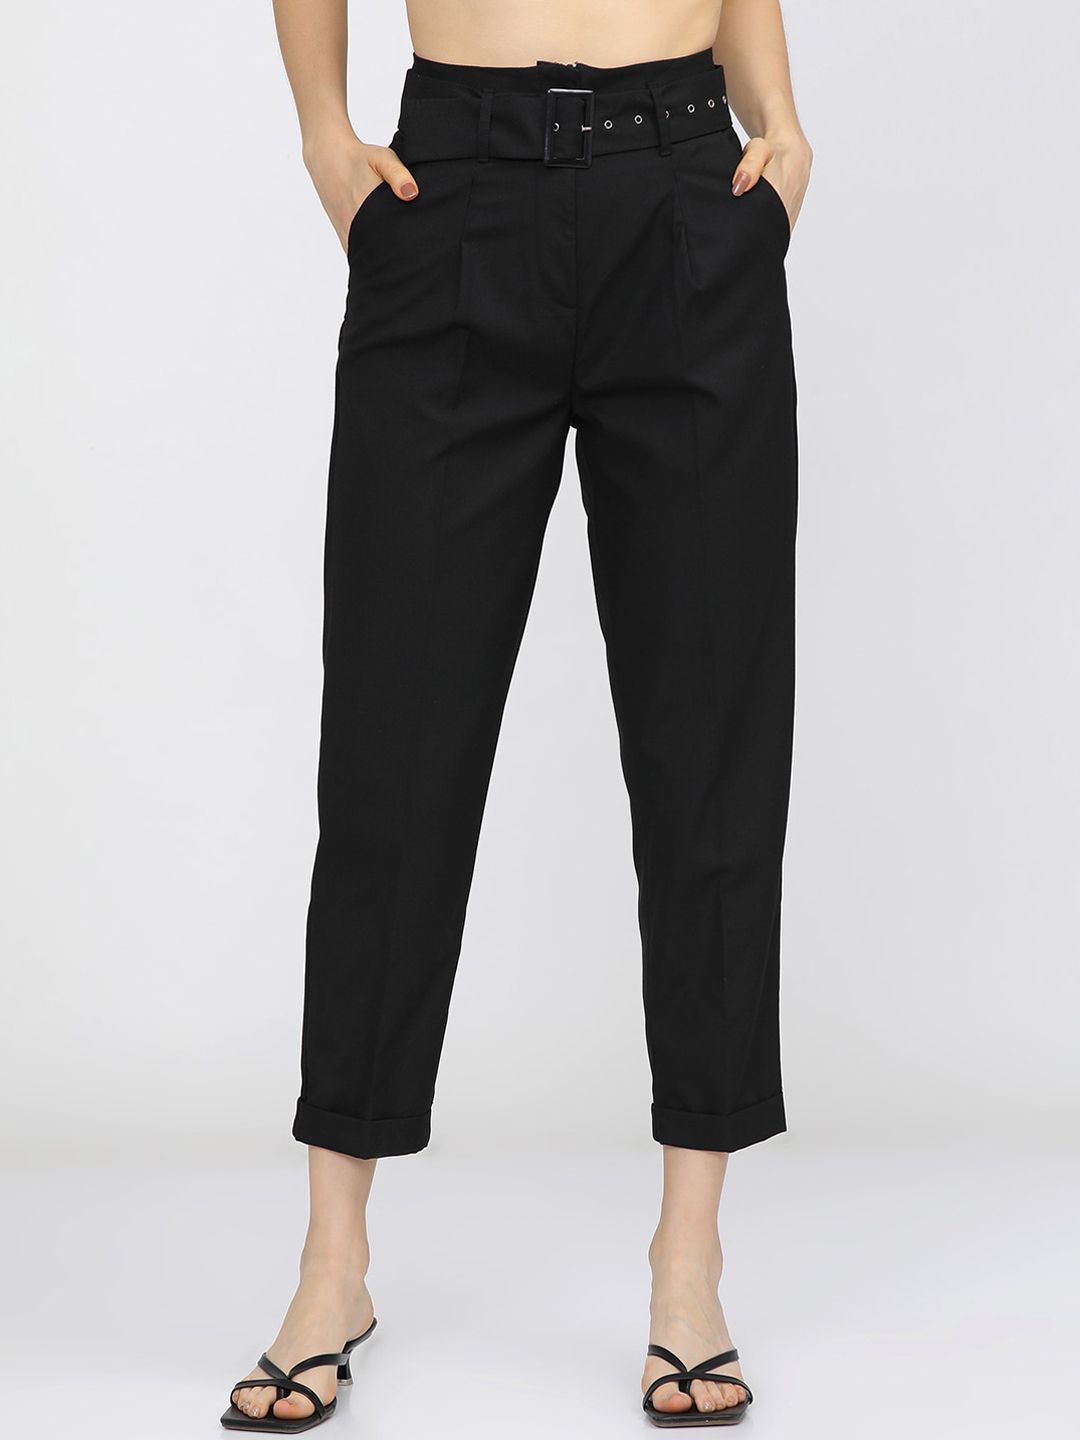 Tokyo Talkies Women Black Slim Fit Pleated Trousers With Belt Price in India